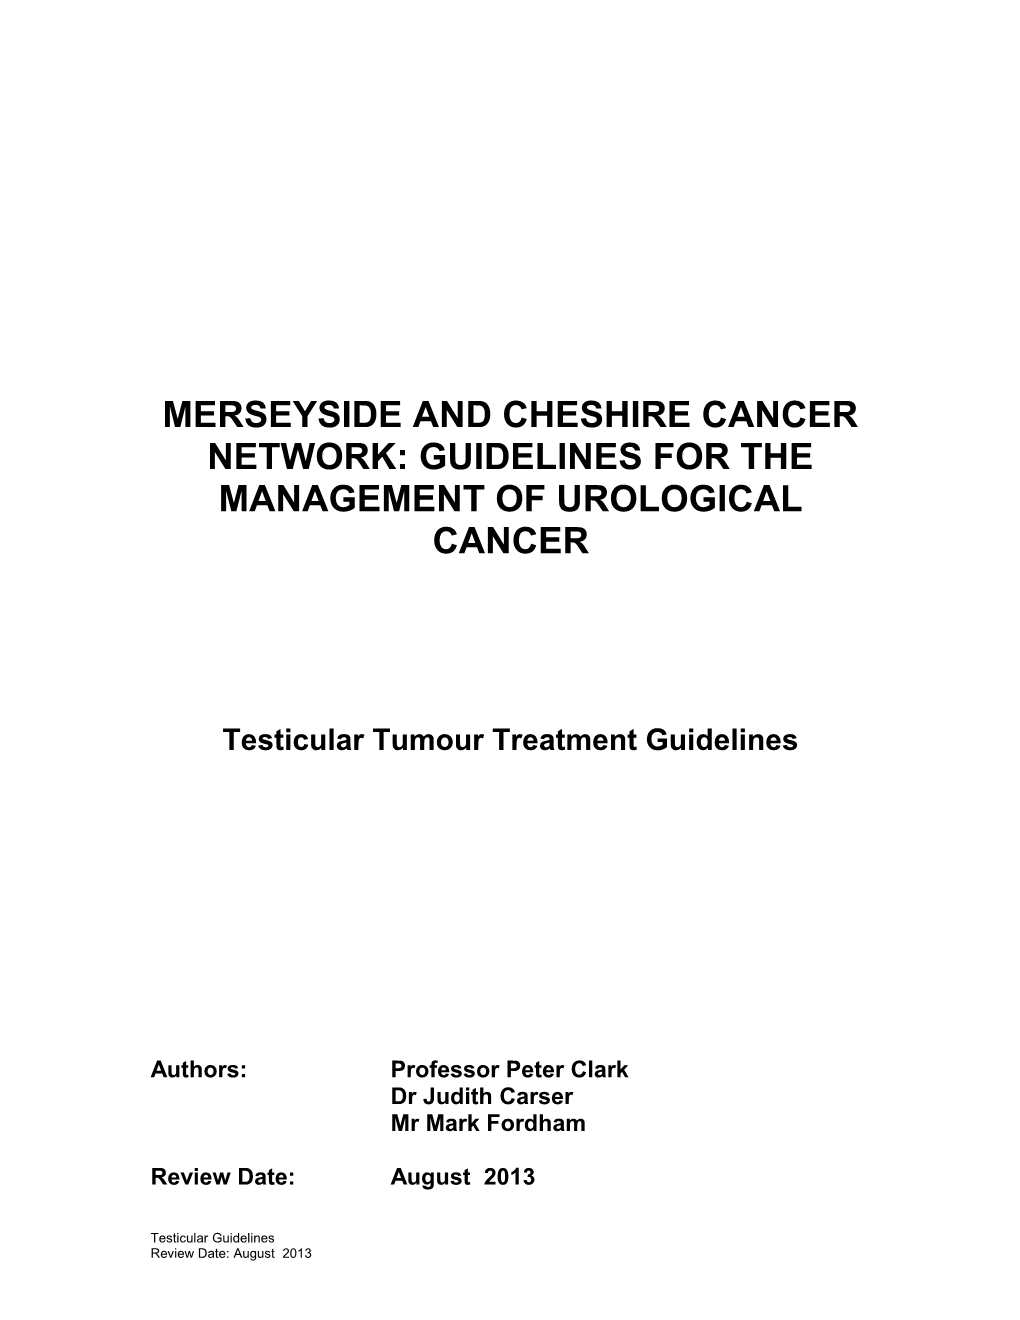 Guidelines for the Management of Urological Cancers at the Royal Liverpool and Broadgreen